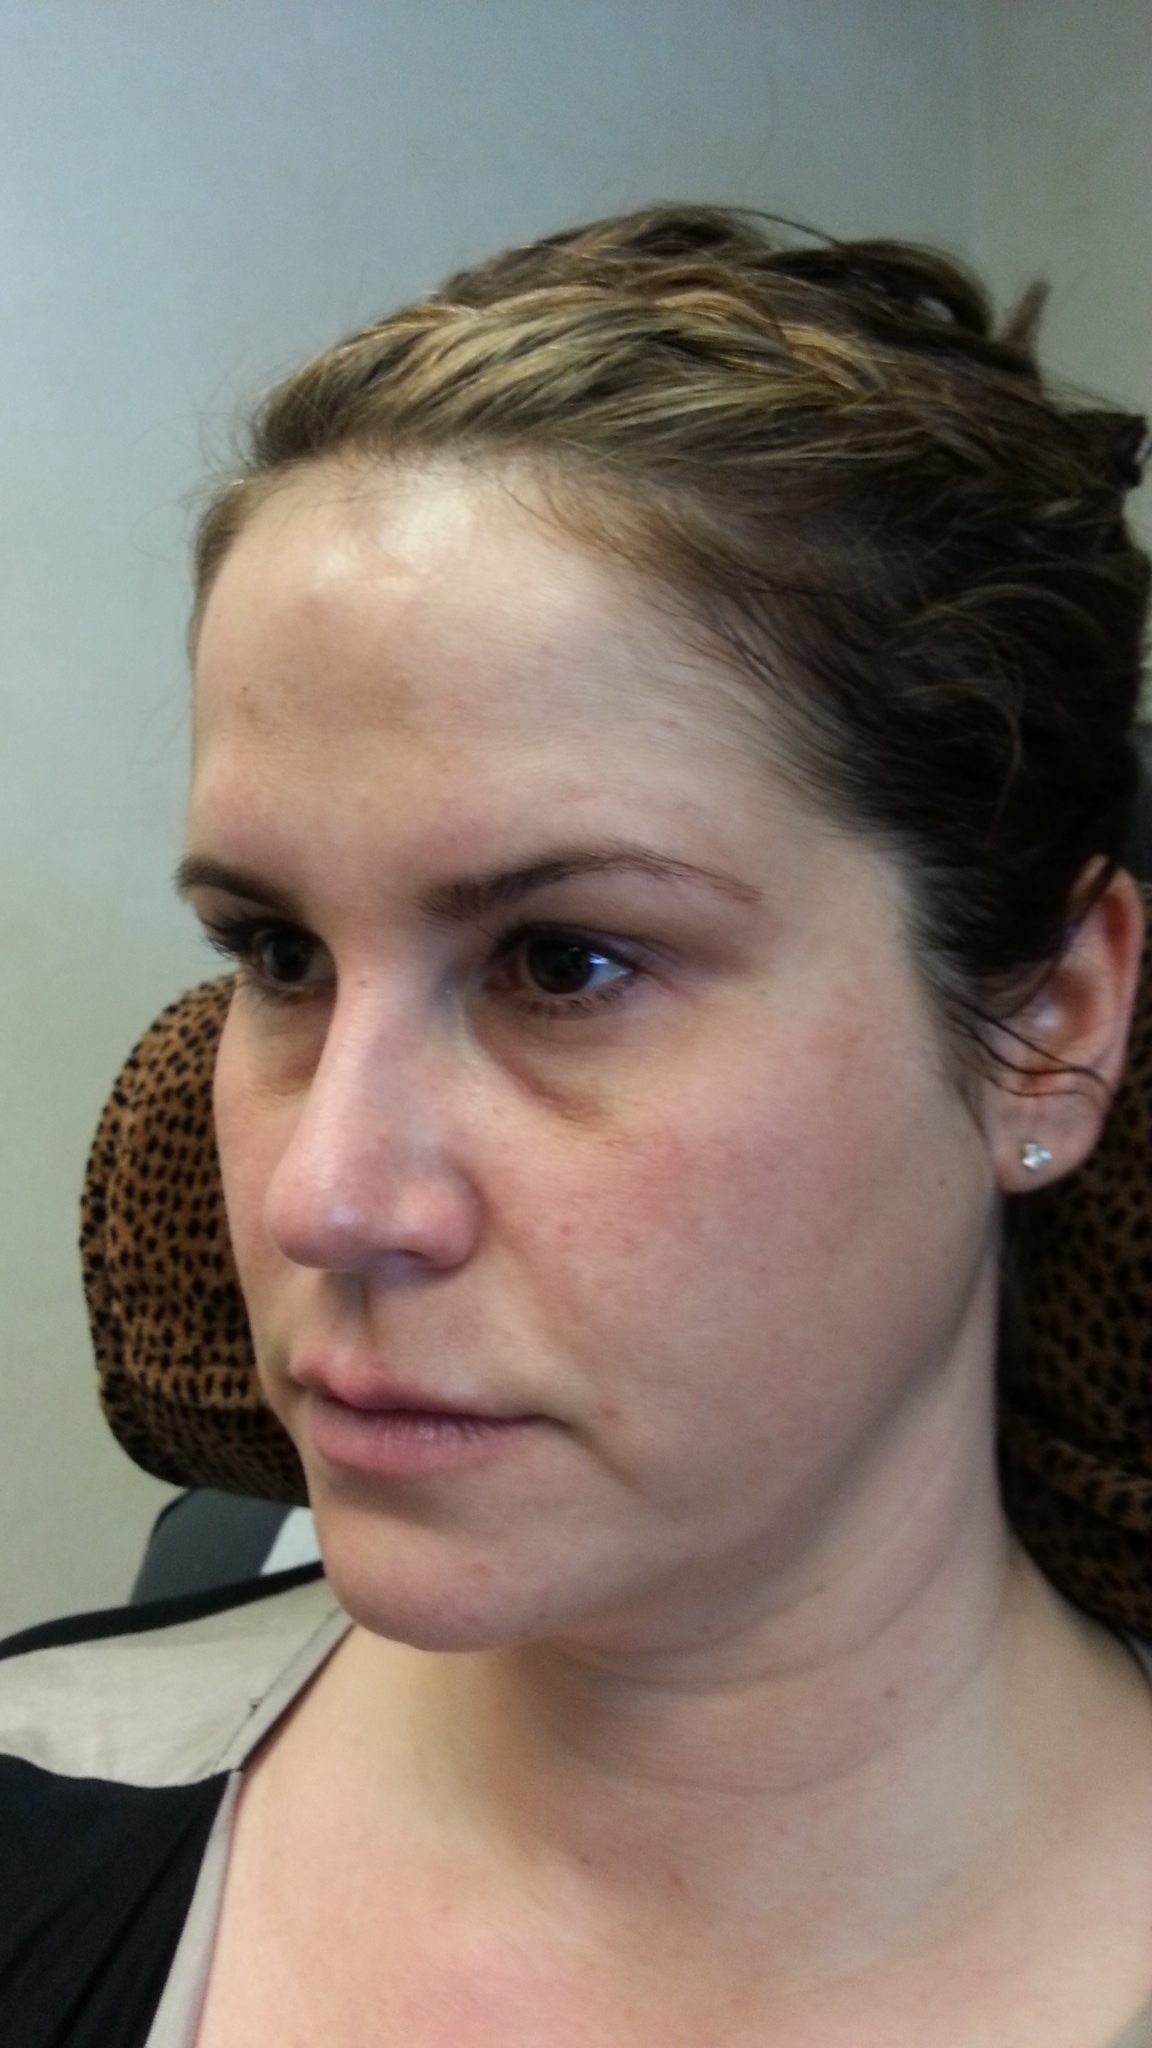 Before 2 cc’s Restylane in the tear troughs and 3 cc’s Restylane Lyft in the cheeks, corners of the mouth, and jowls.